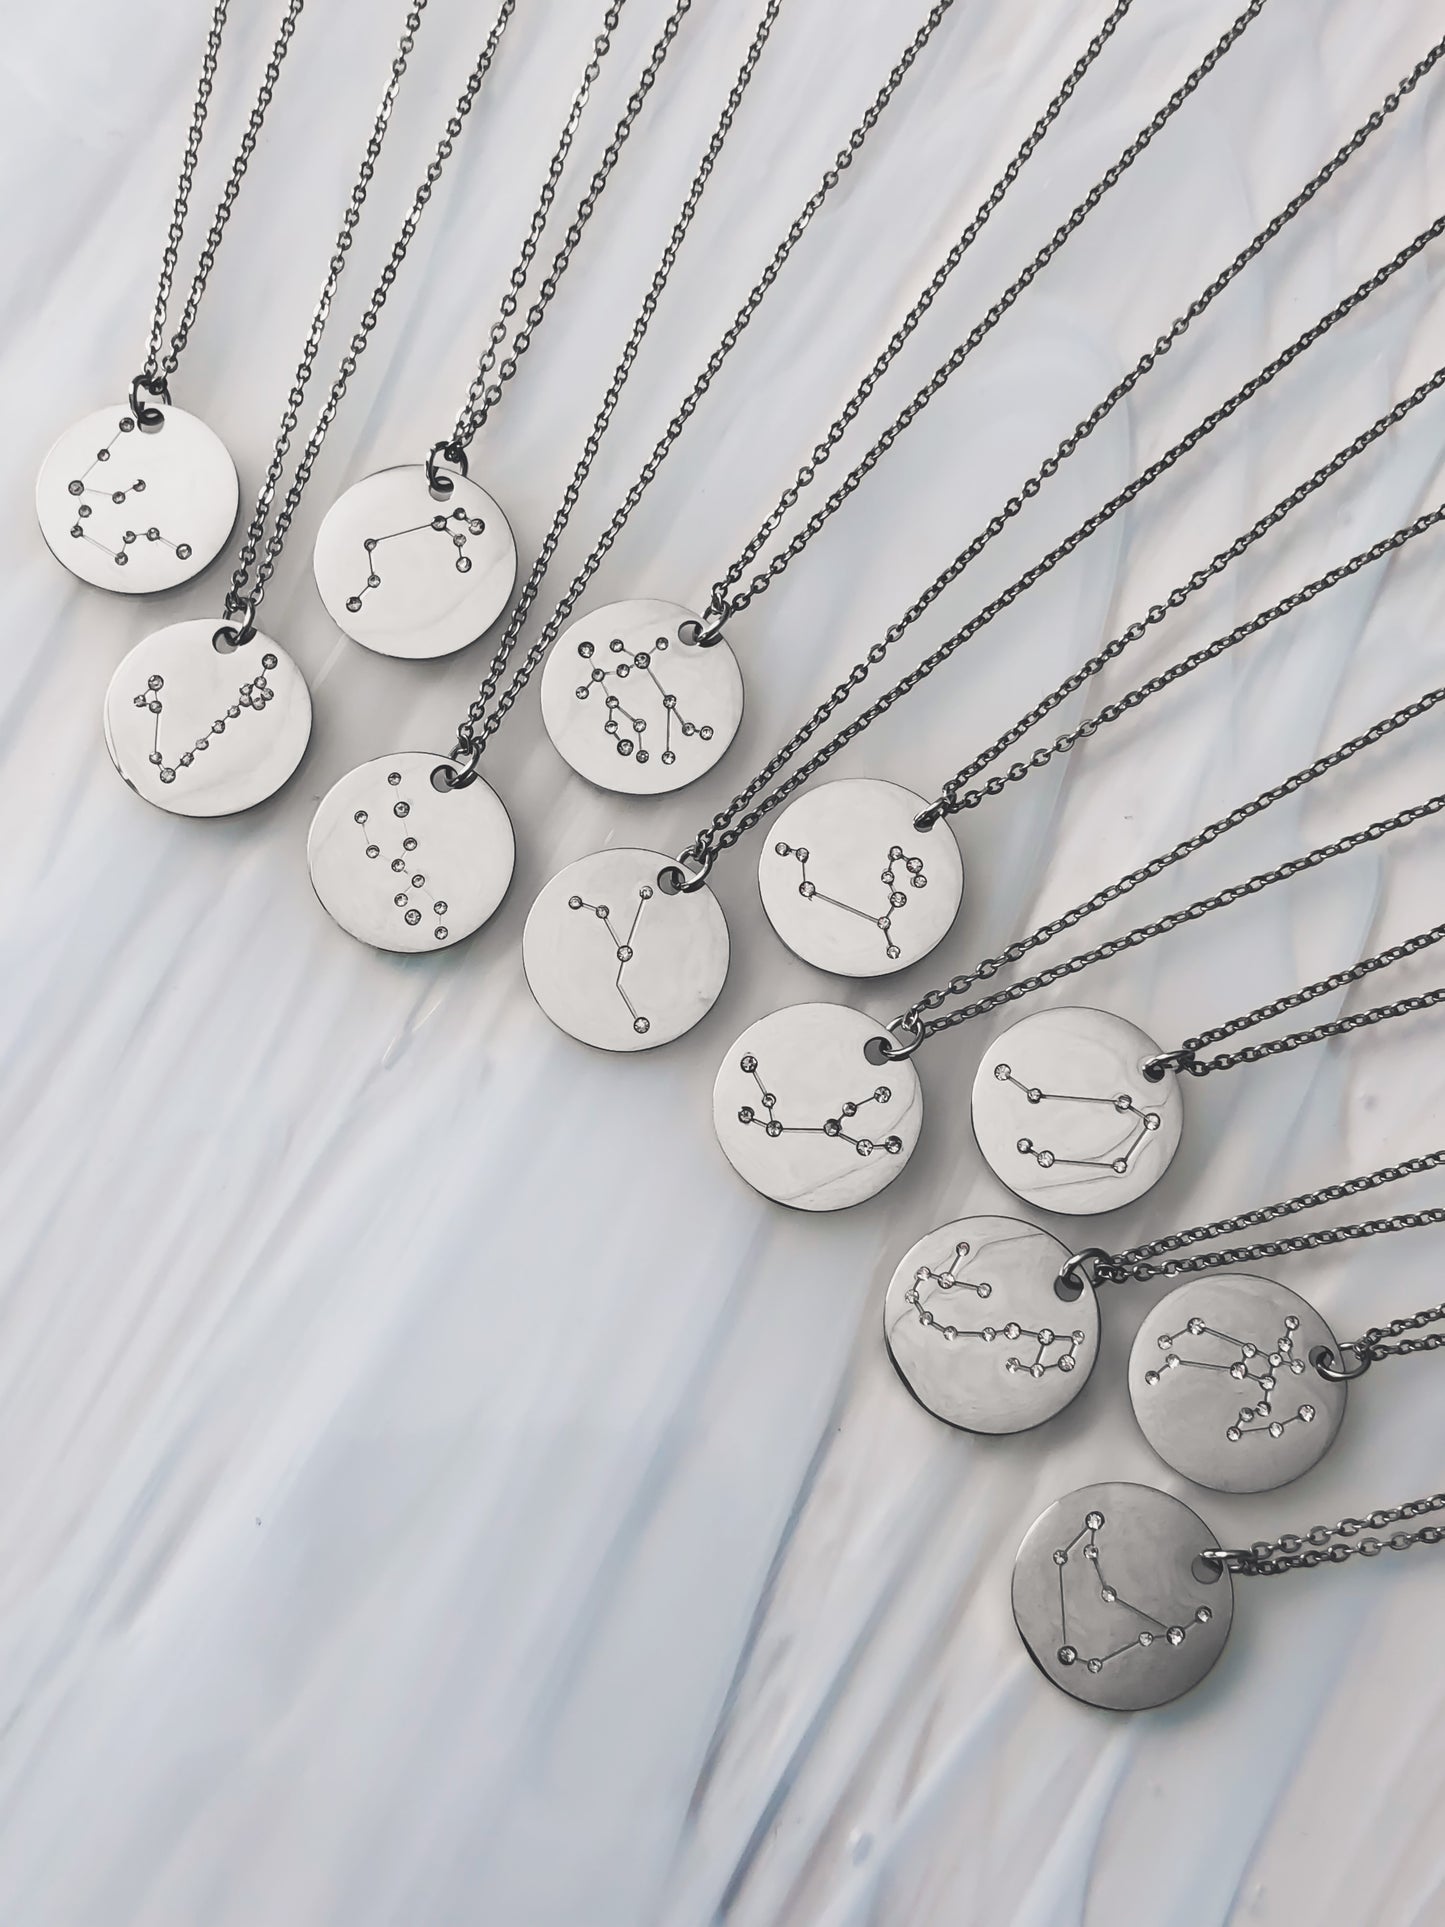 Zodiac Collection - Silver Gemini Necklace (May 21 - June 20)